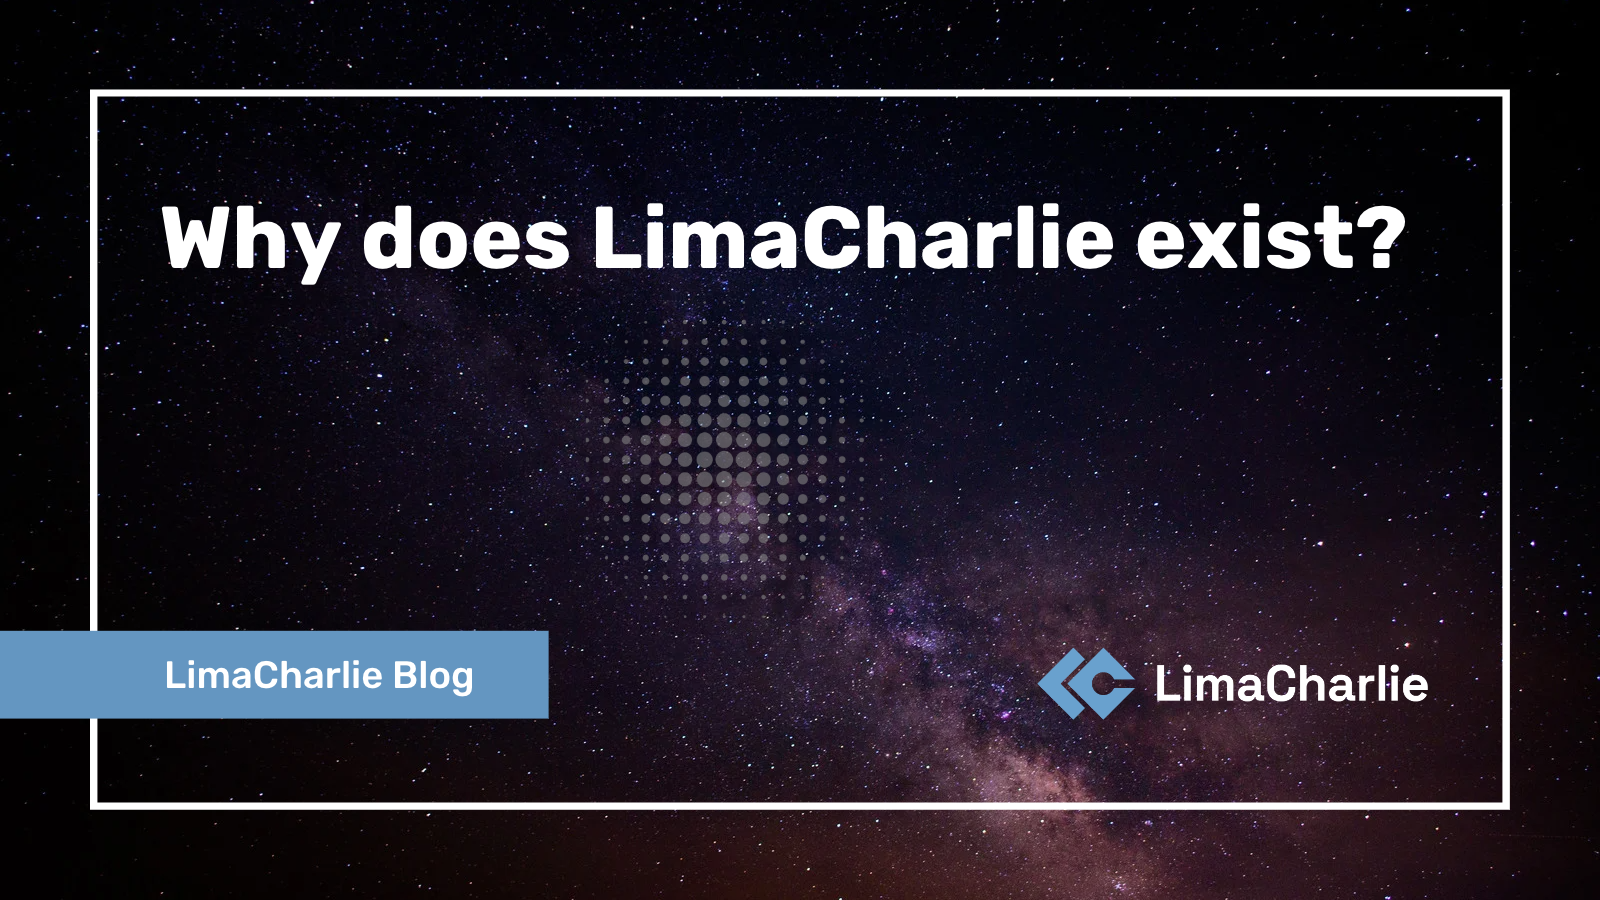 Why does LimaCharlie exist?